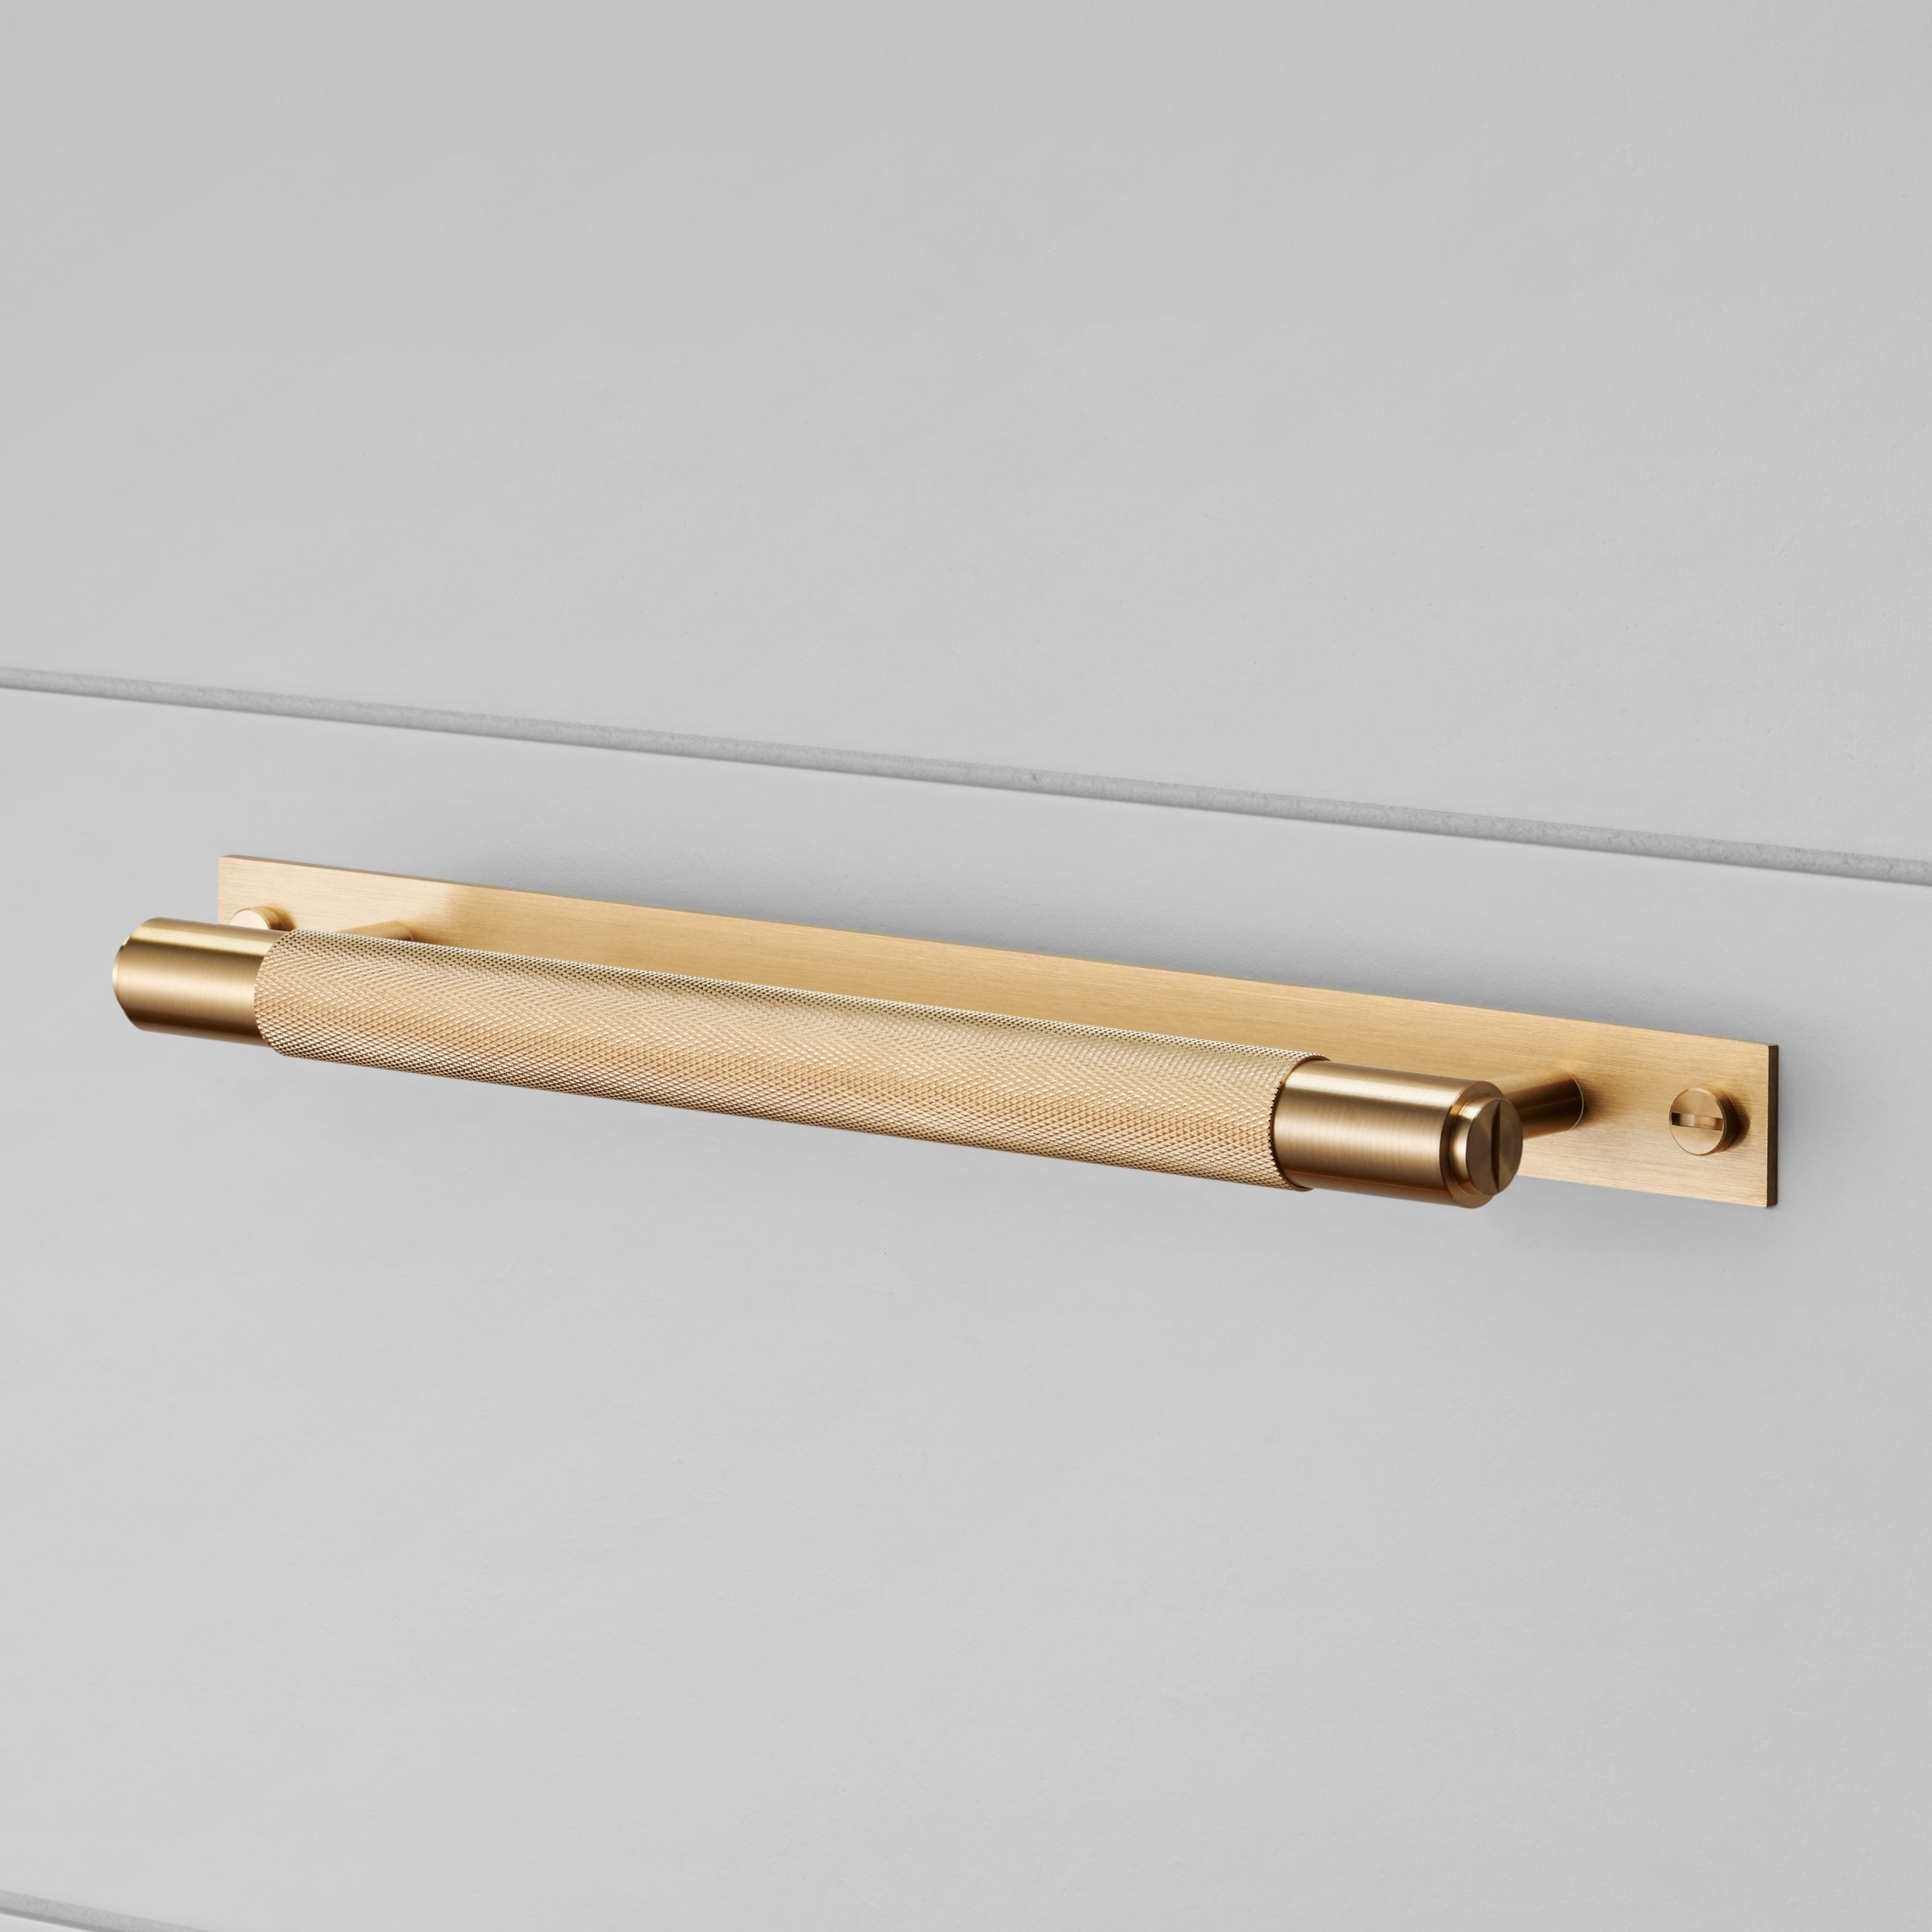 Buster + Punch Pull Bar, Linear Design Hardware Buster + Punch Brass 0.3x0.09x0.03 